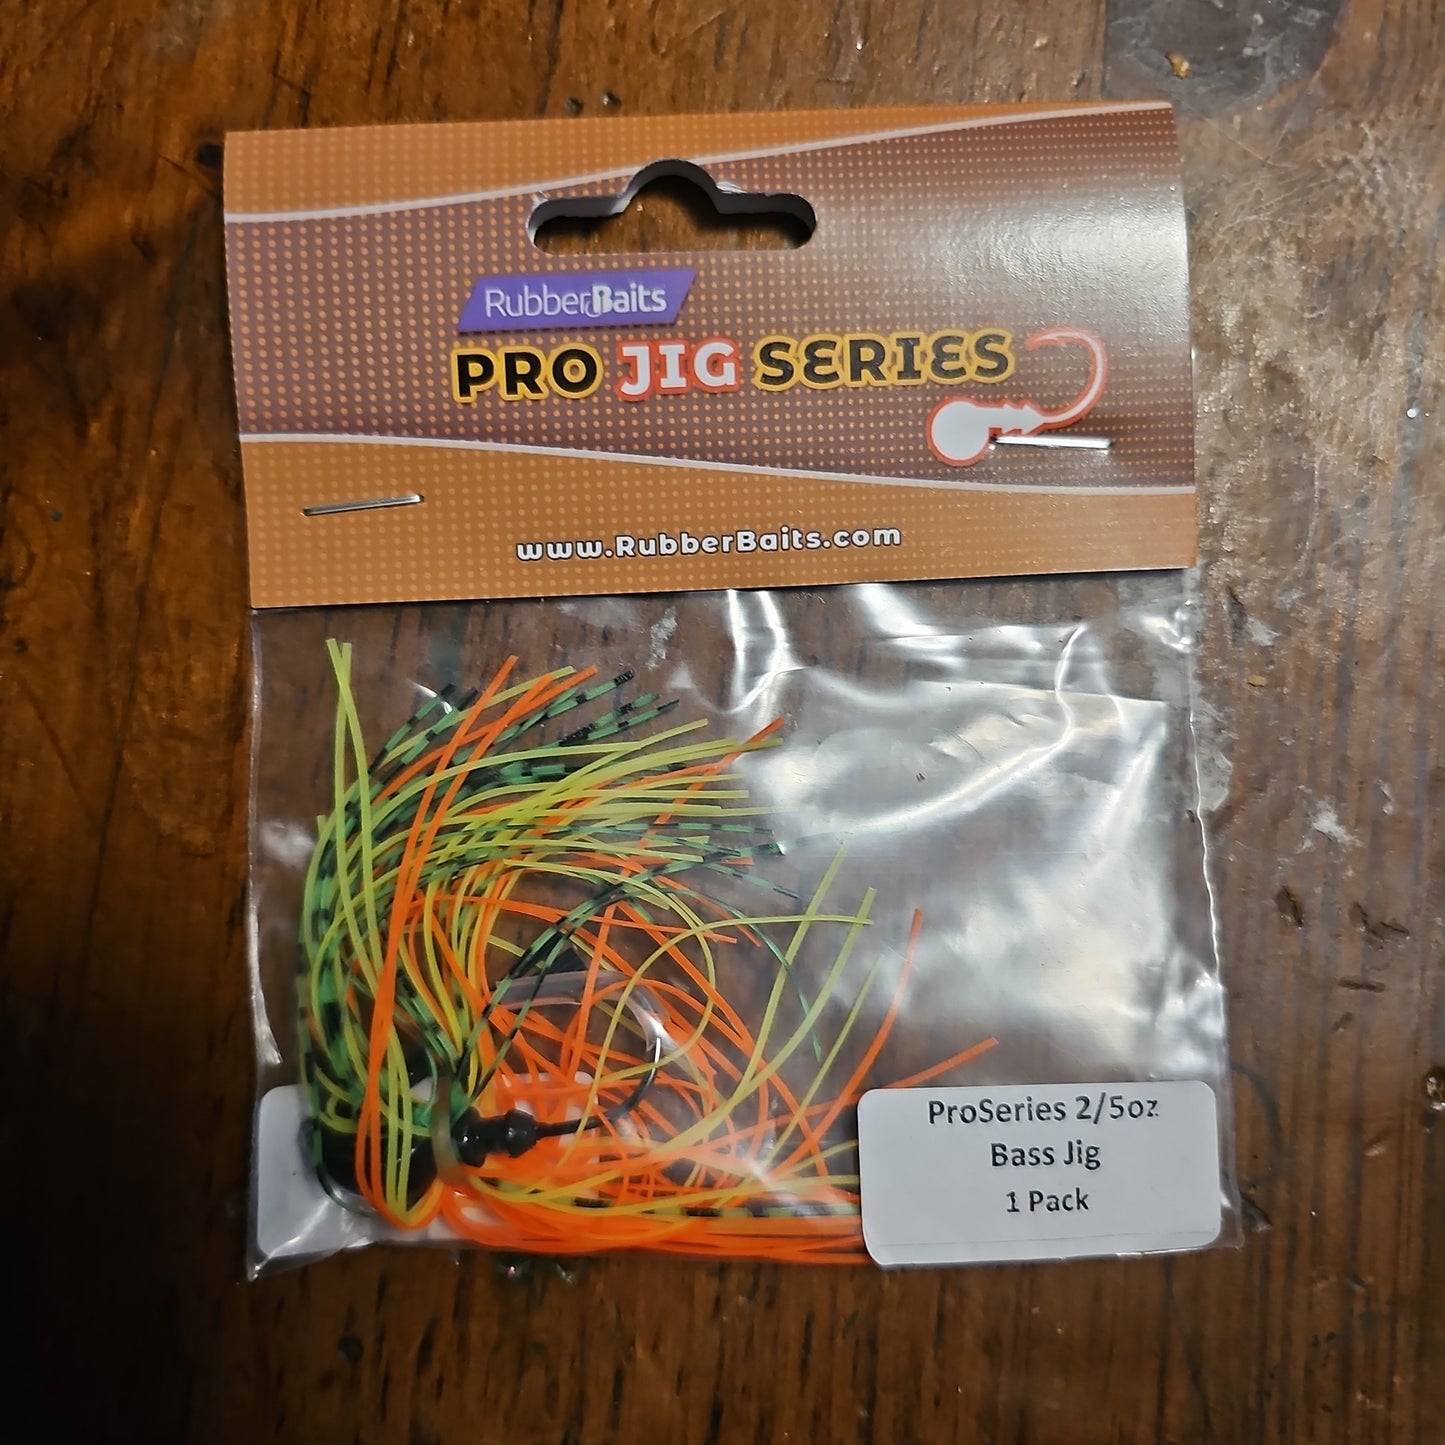 Pro Series Bass Jig 2/5oz - Fish and more